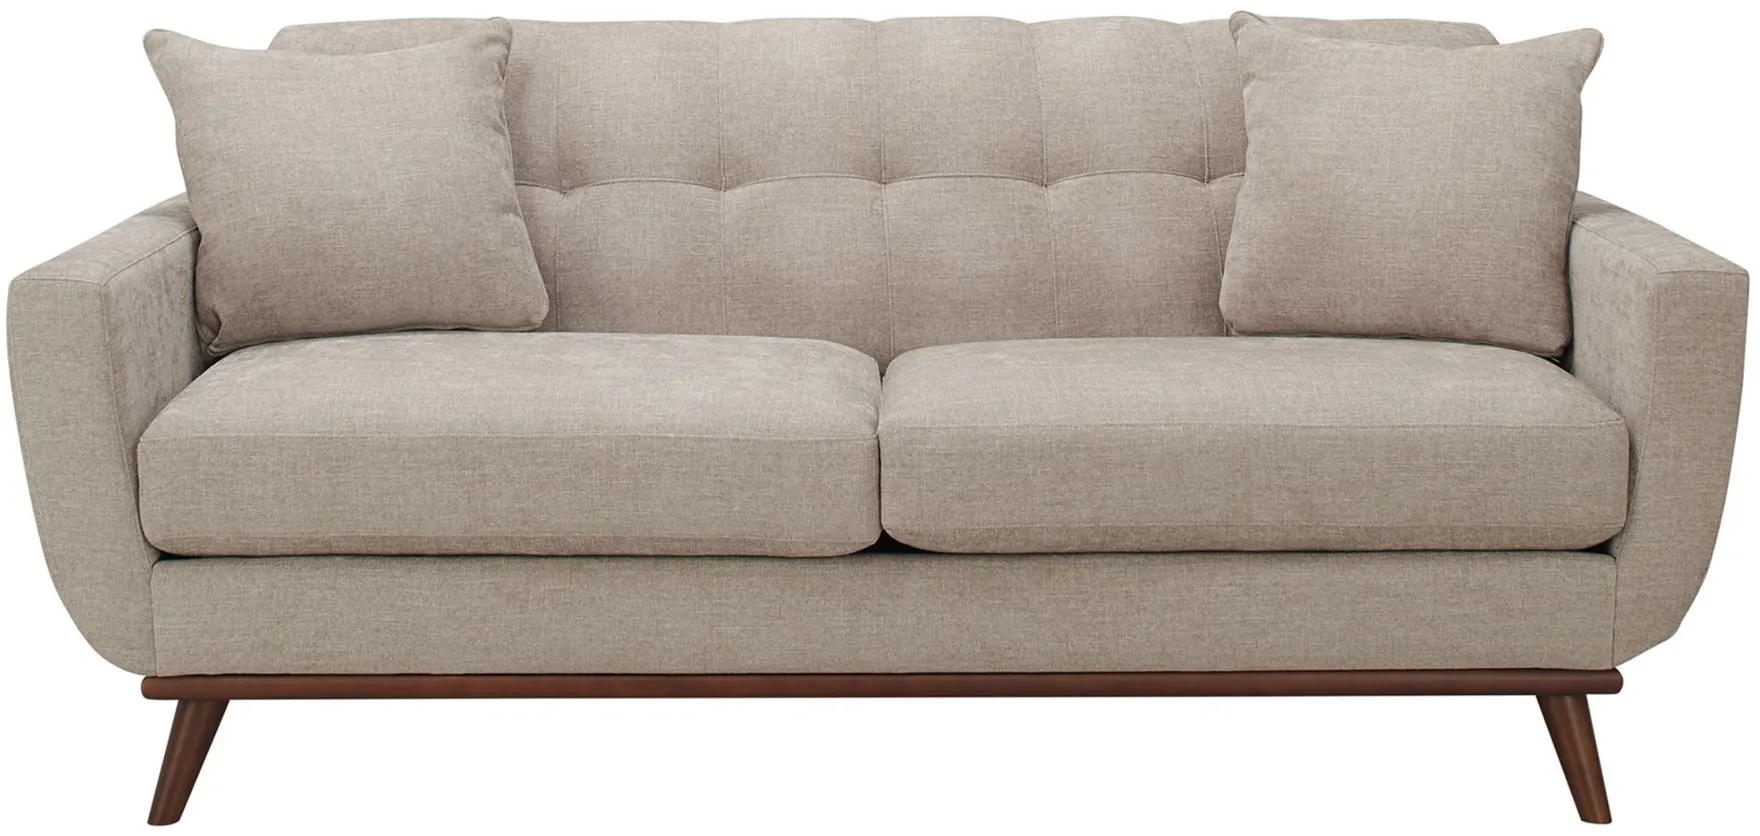 Milo Apartment Sofa in Sugar Shack Putty by H.M. Richards